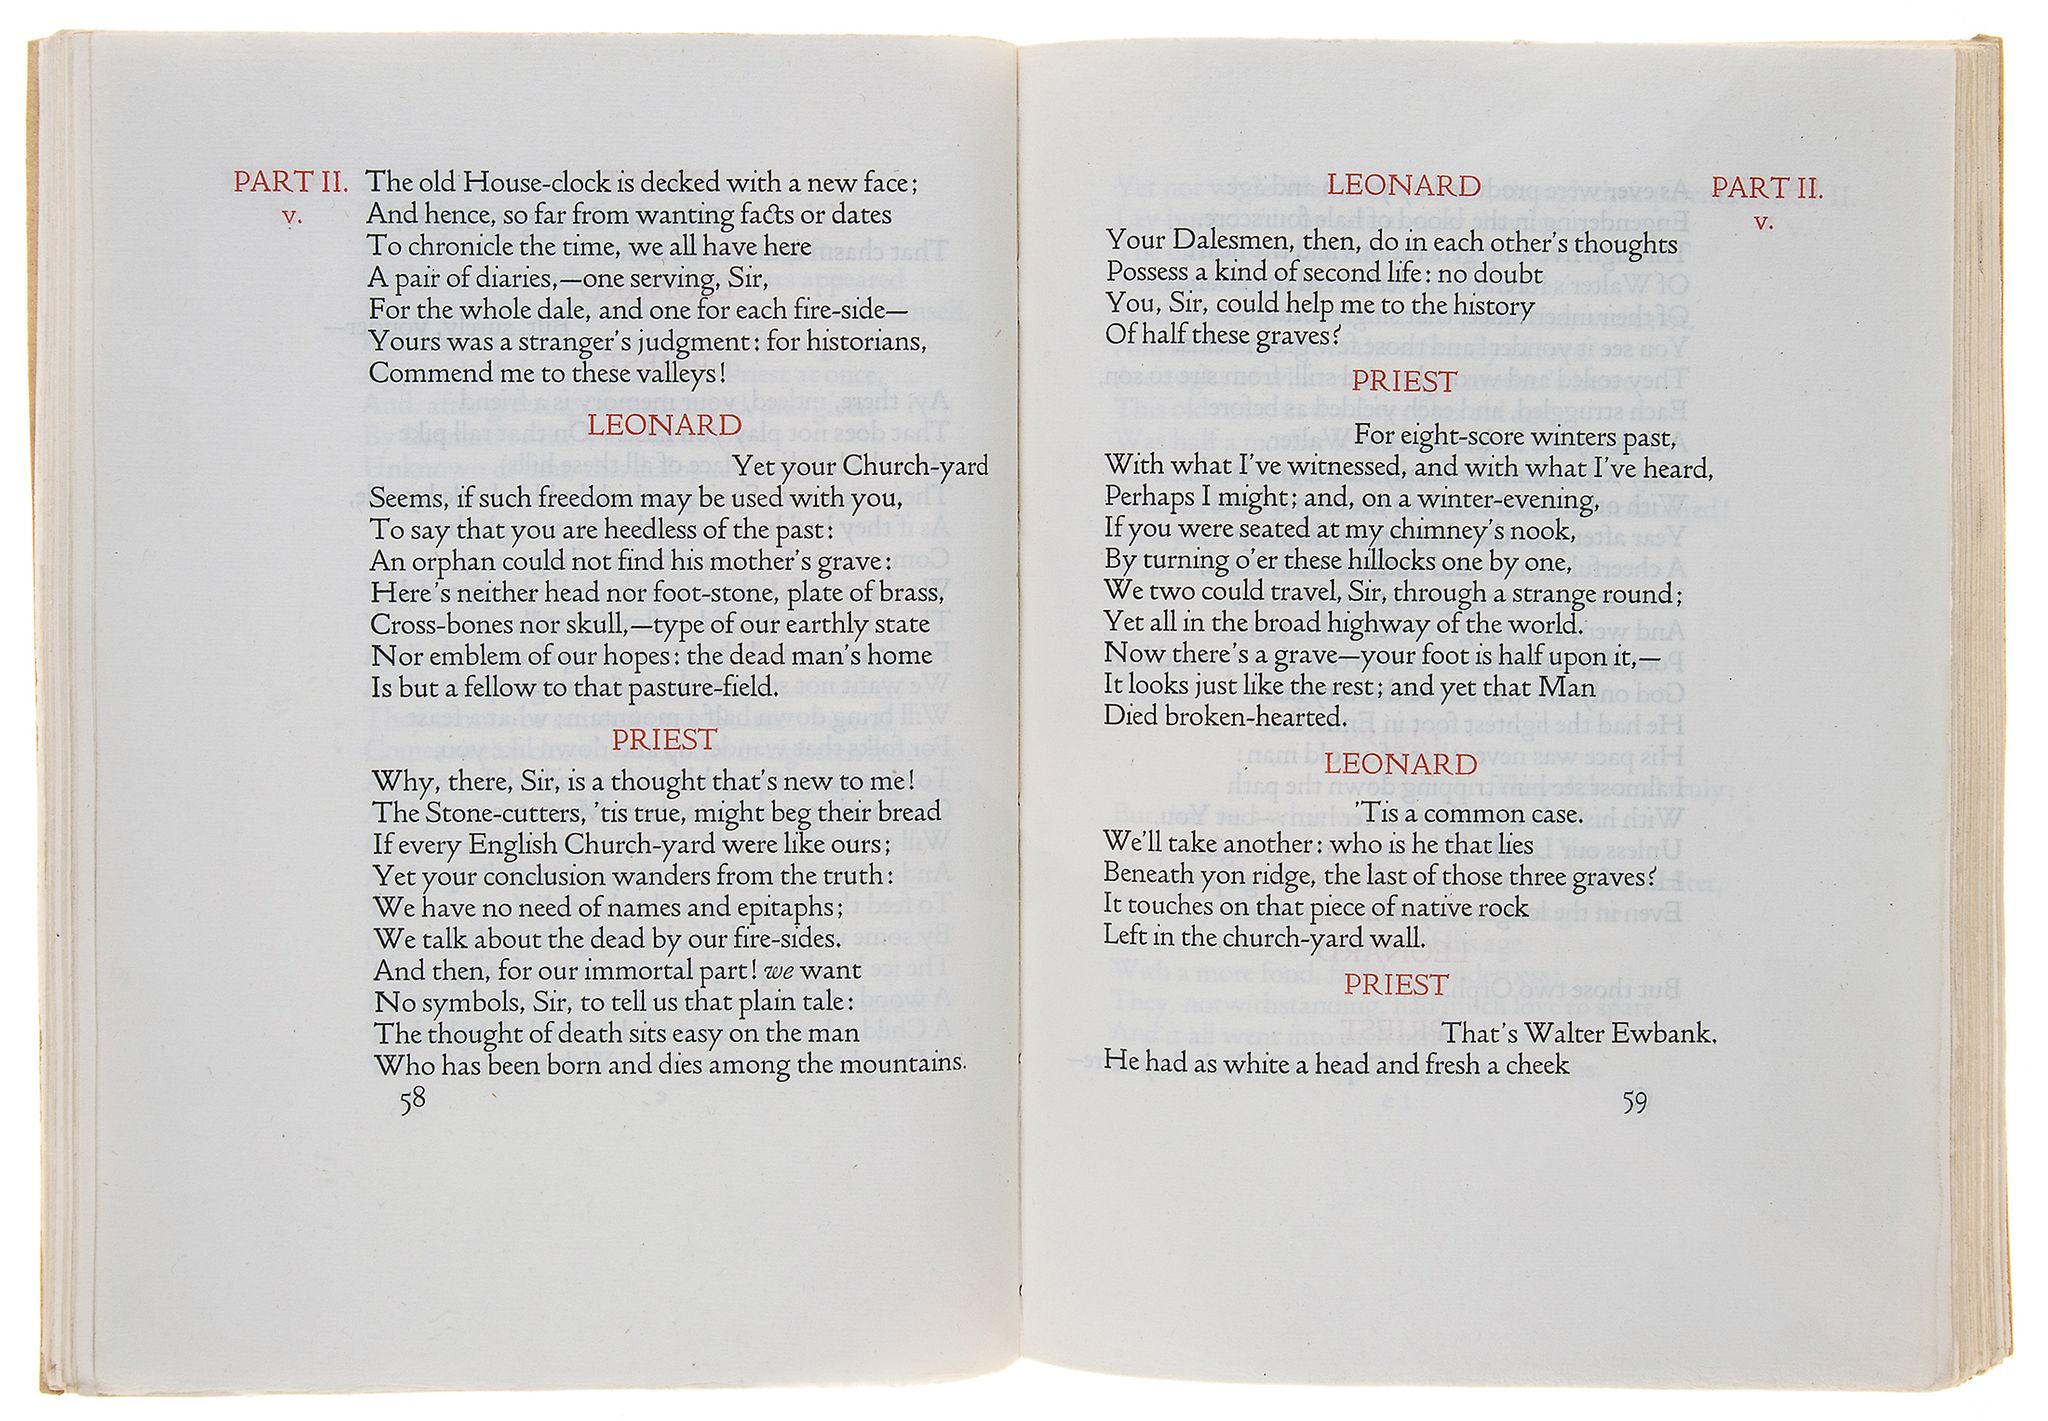 Wordsworth (William) - A Decade of Years: Poems...1798-1807,   one of 200 copies, printed in red and